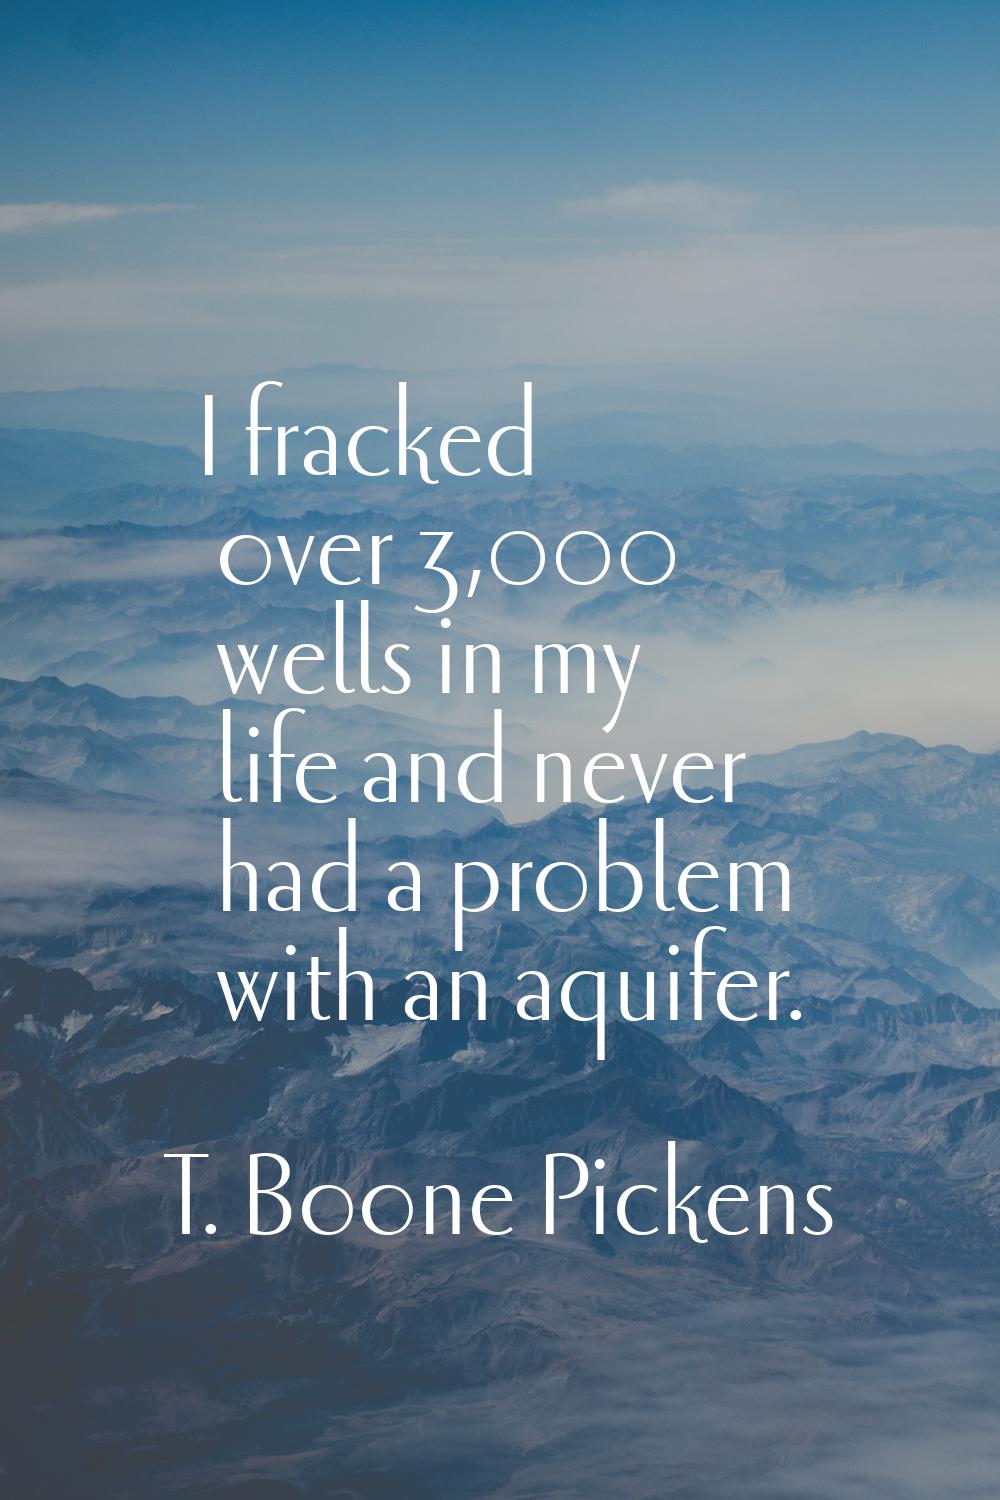 I fracked over 3,000 wells in my life and never had a problem with an aquifer.